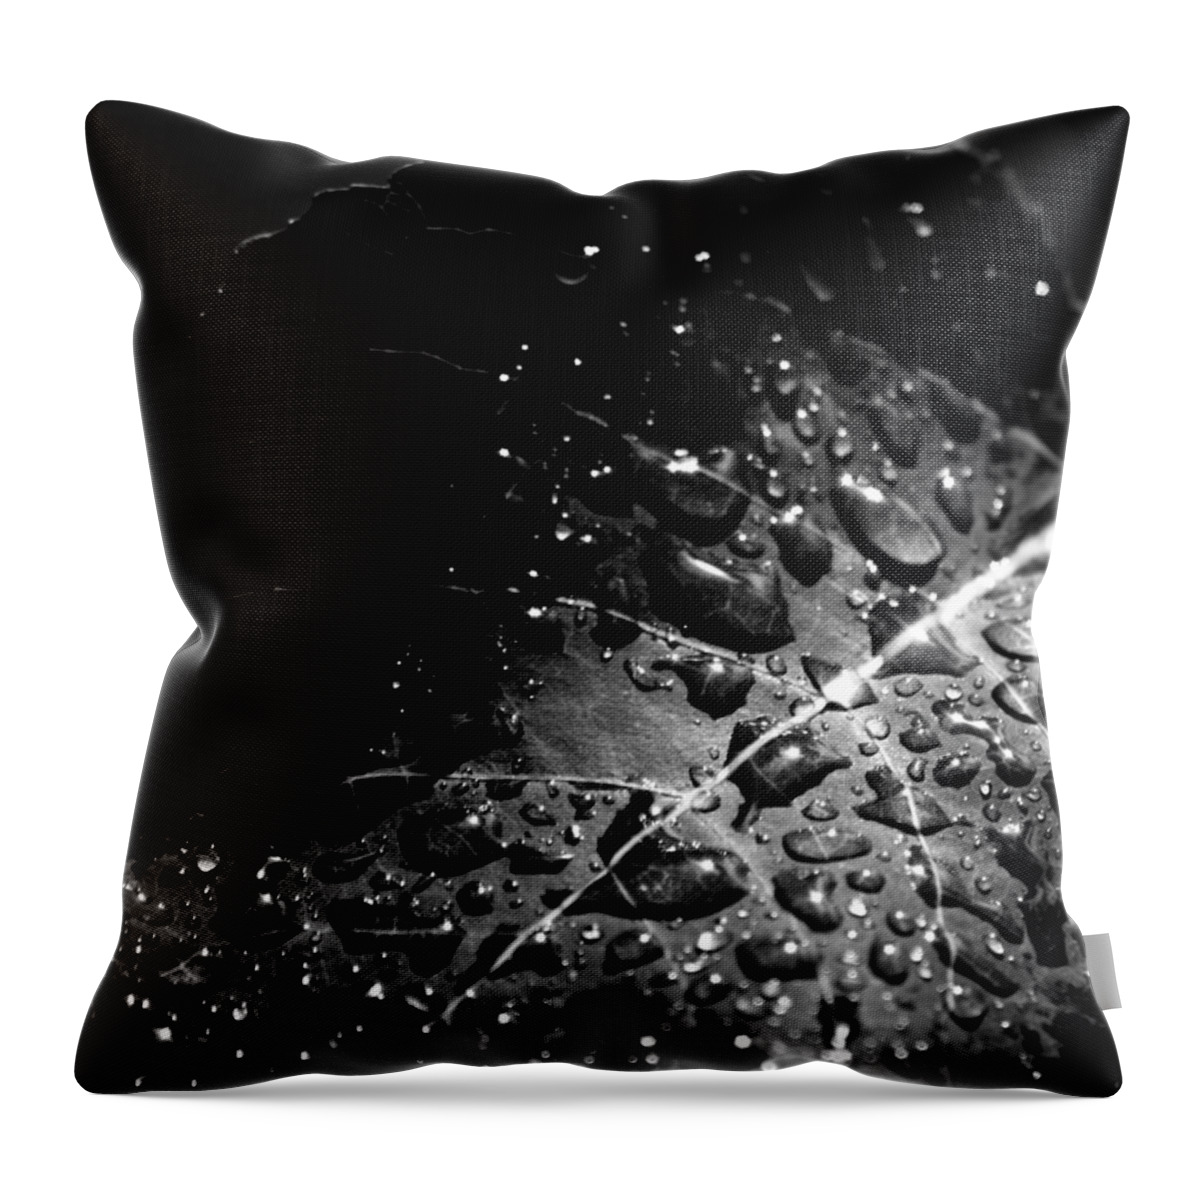 Rain Drops Throw Pillow featuring the photograph Generous Hands by J C